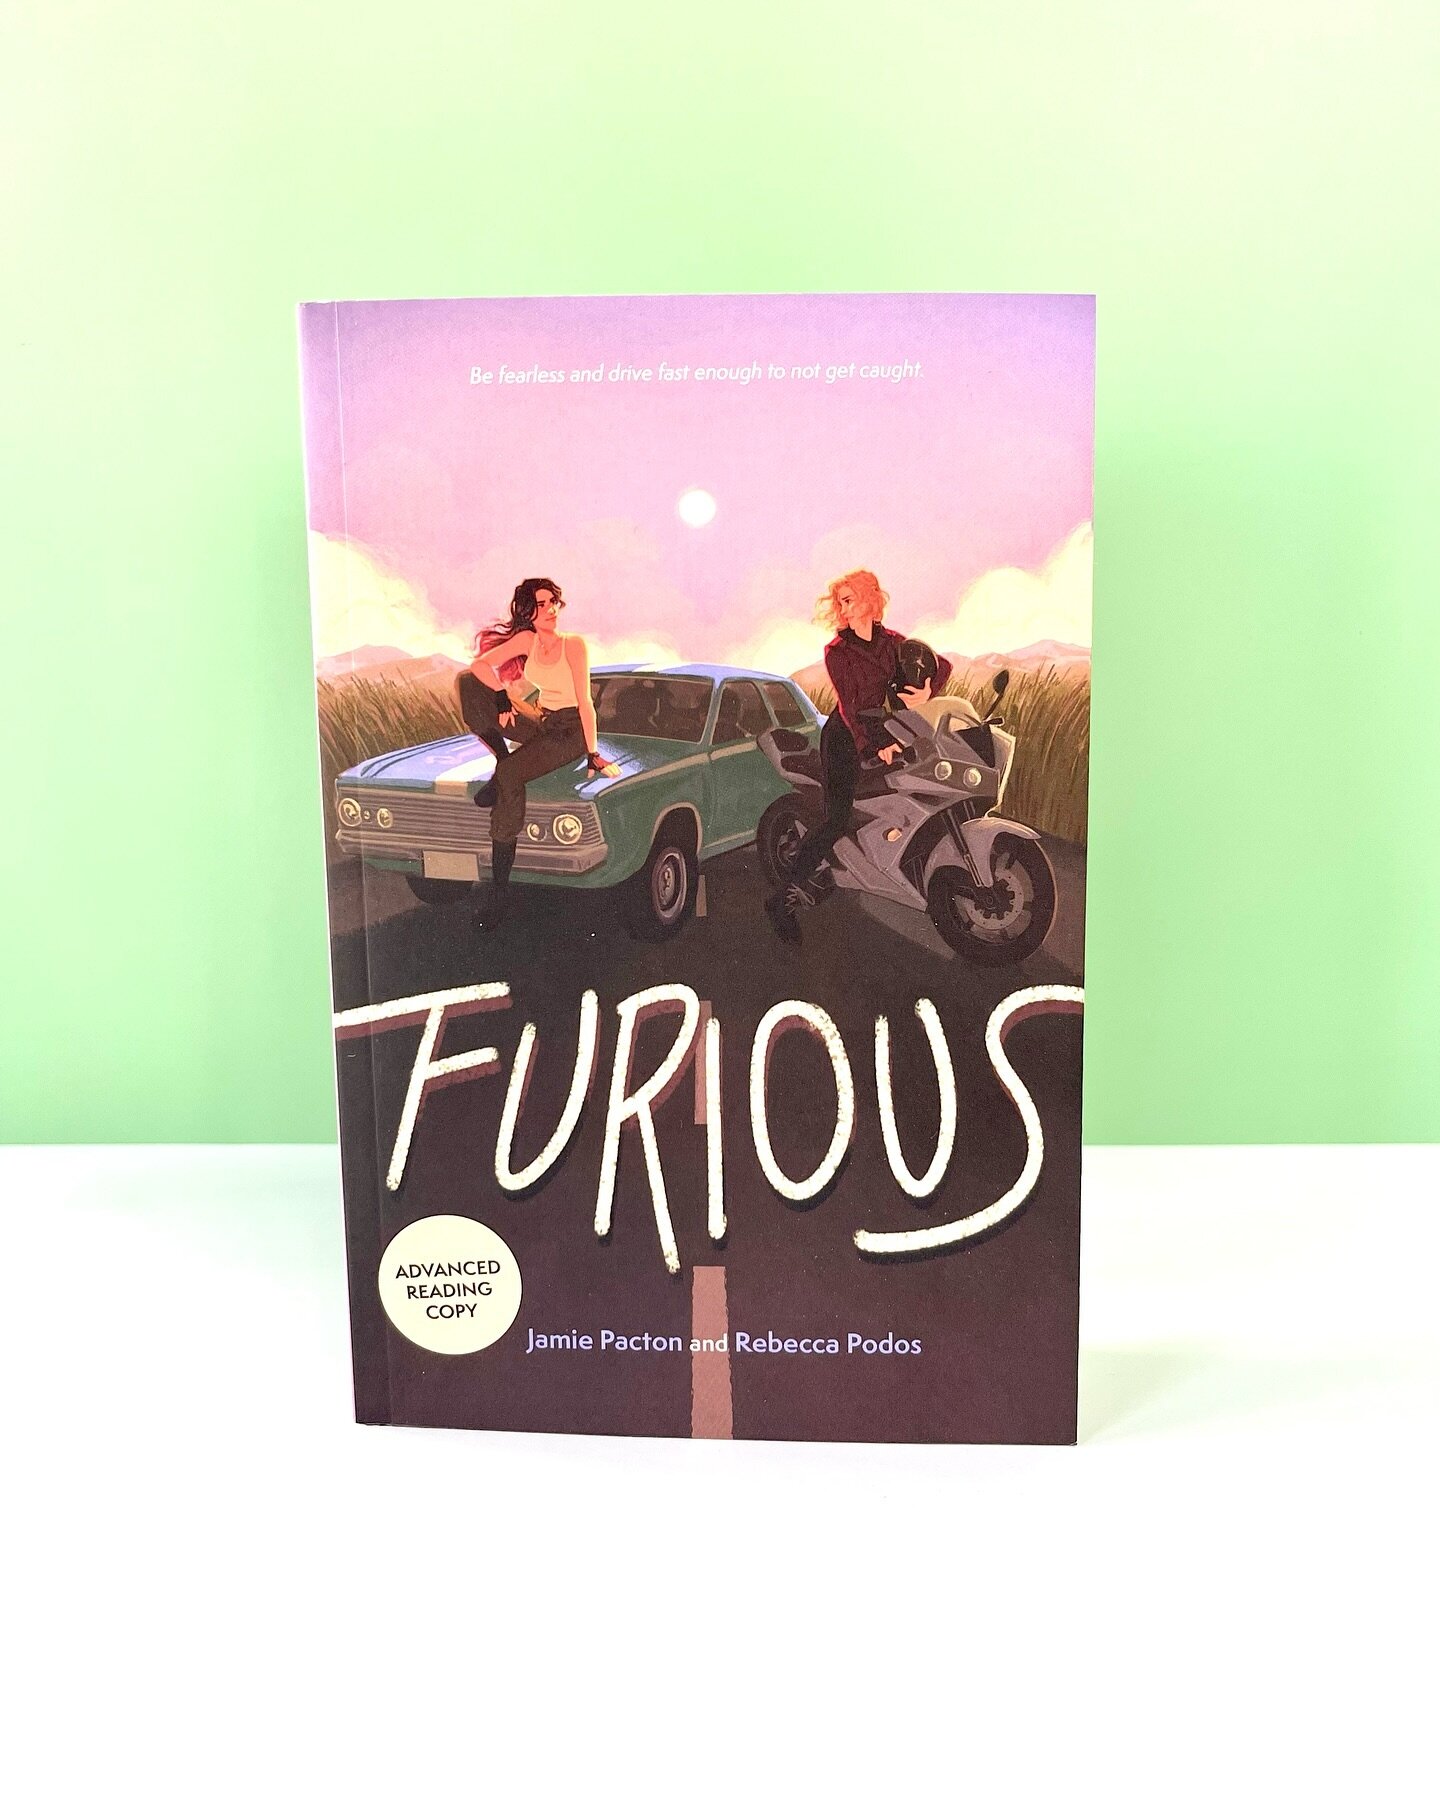 This beauty came in this week! Do you ever just wish that The Fast and the Furious was a little more sapphic? Then this is the perfect book for you. 

&ldquo;There&rsquo;s nothing more thrilling than being behind the wheel when the flag drops, a stre